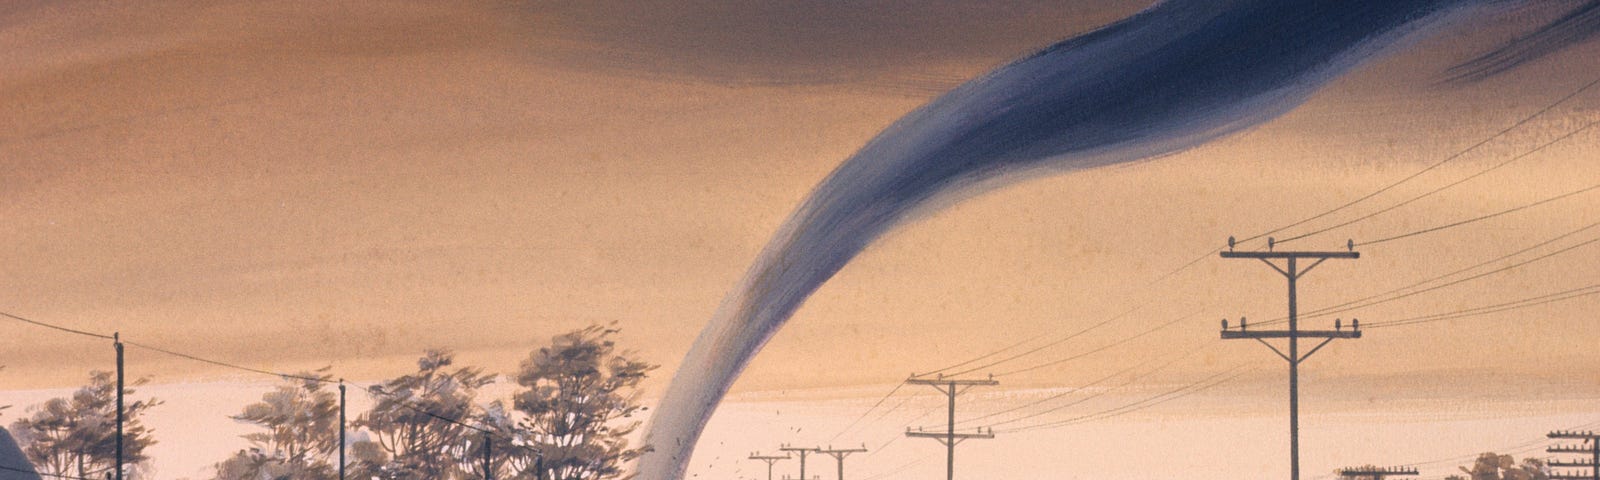 an image/painting of a tornado destroying buildings in a neighborhood